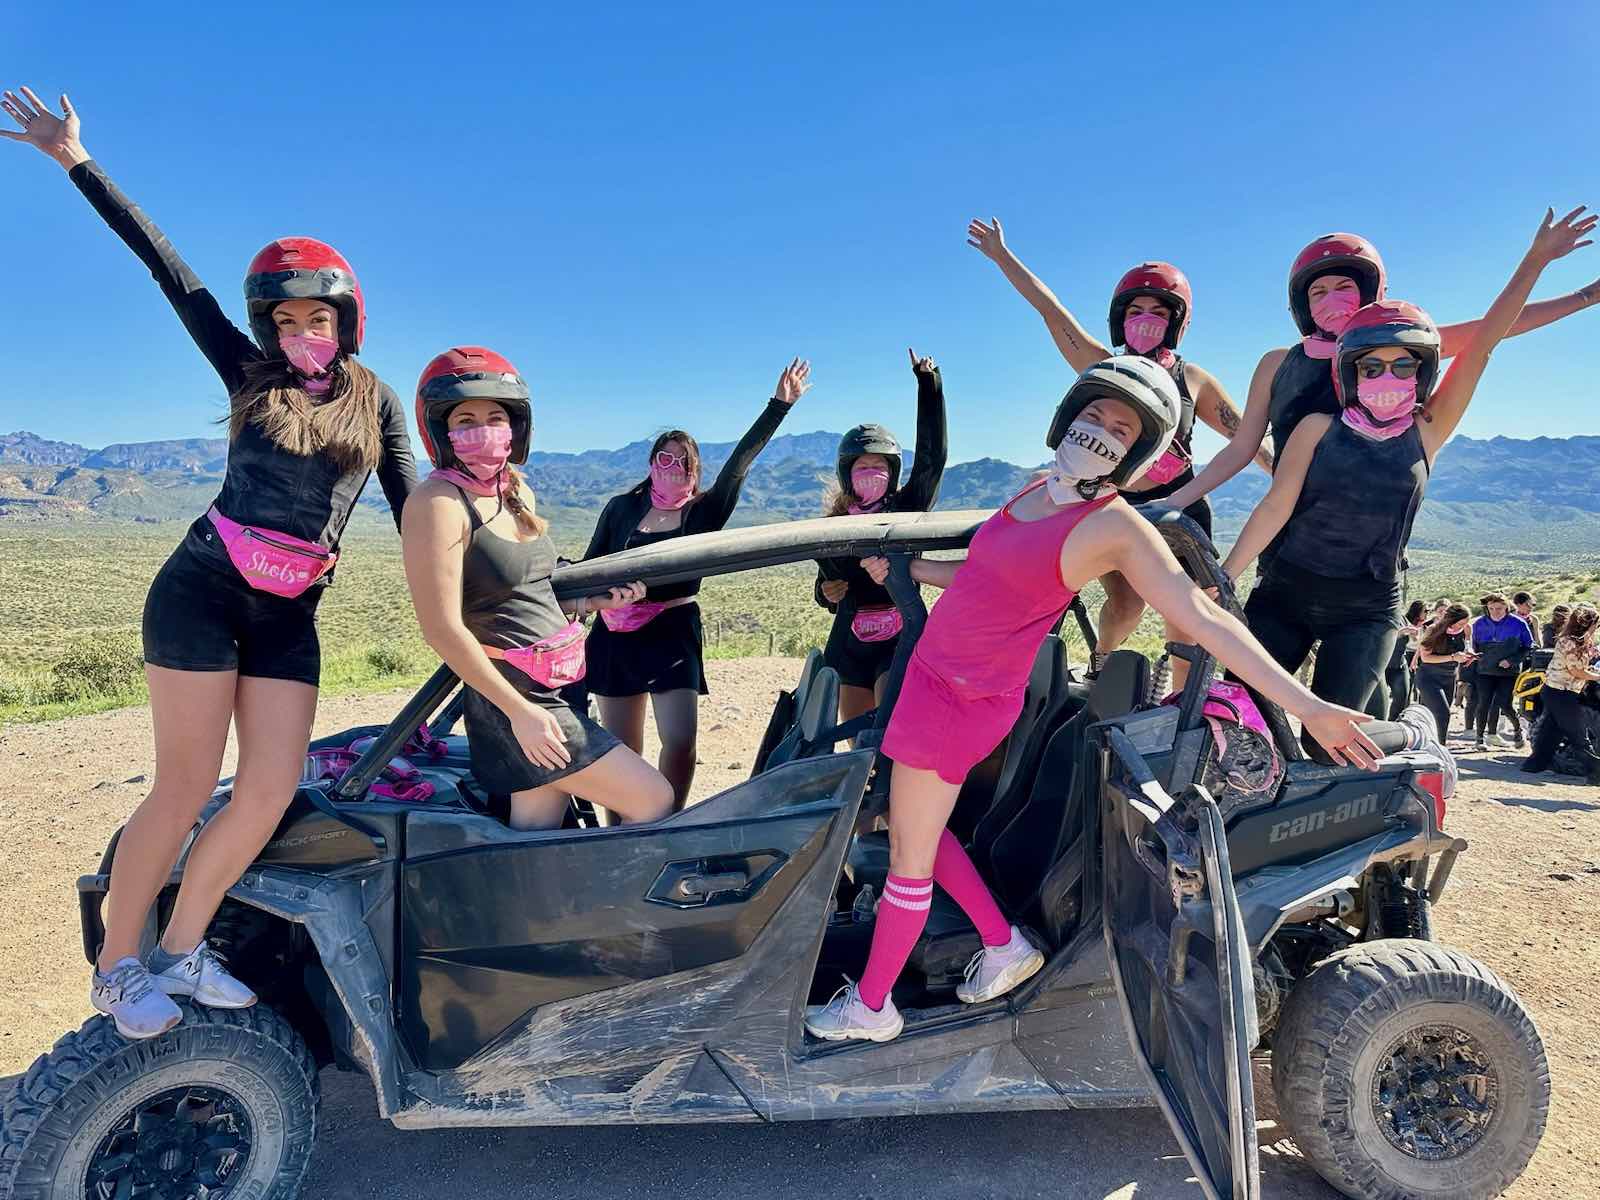 Scottsdale Bachelorette Party Activity Ideas and Itinerary